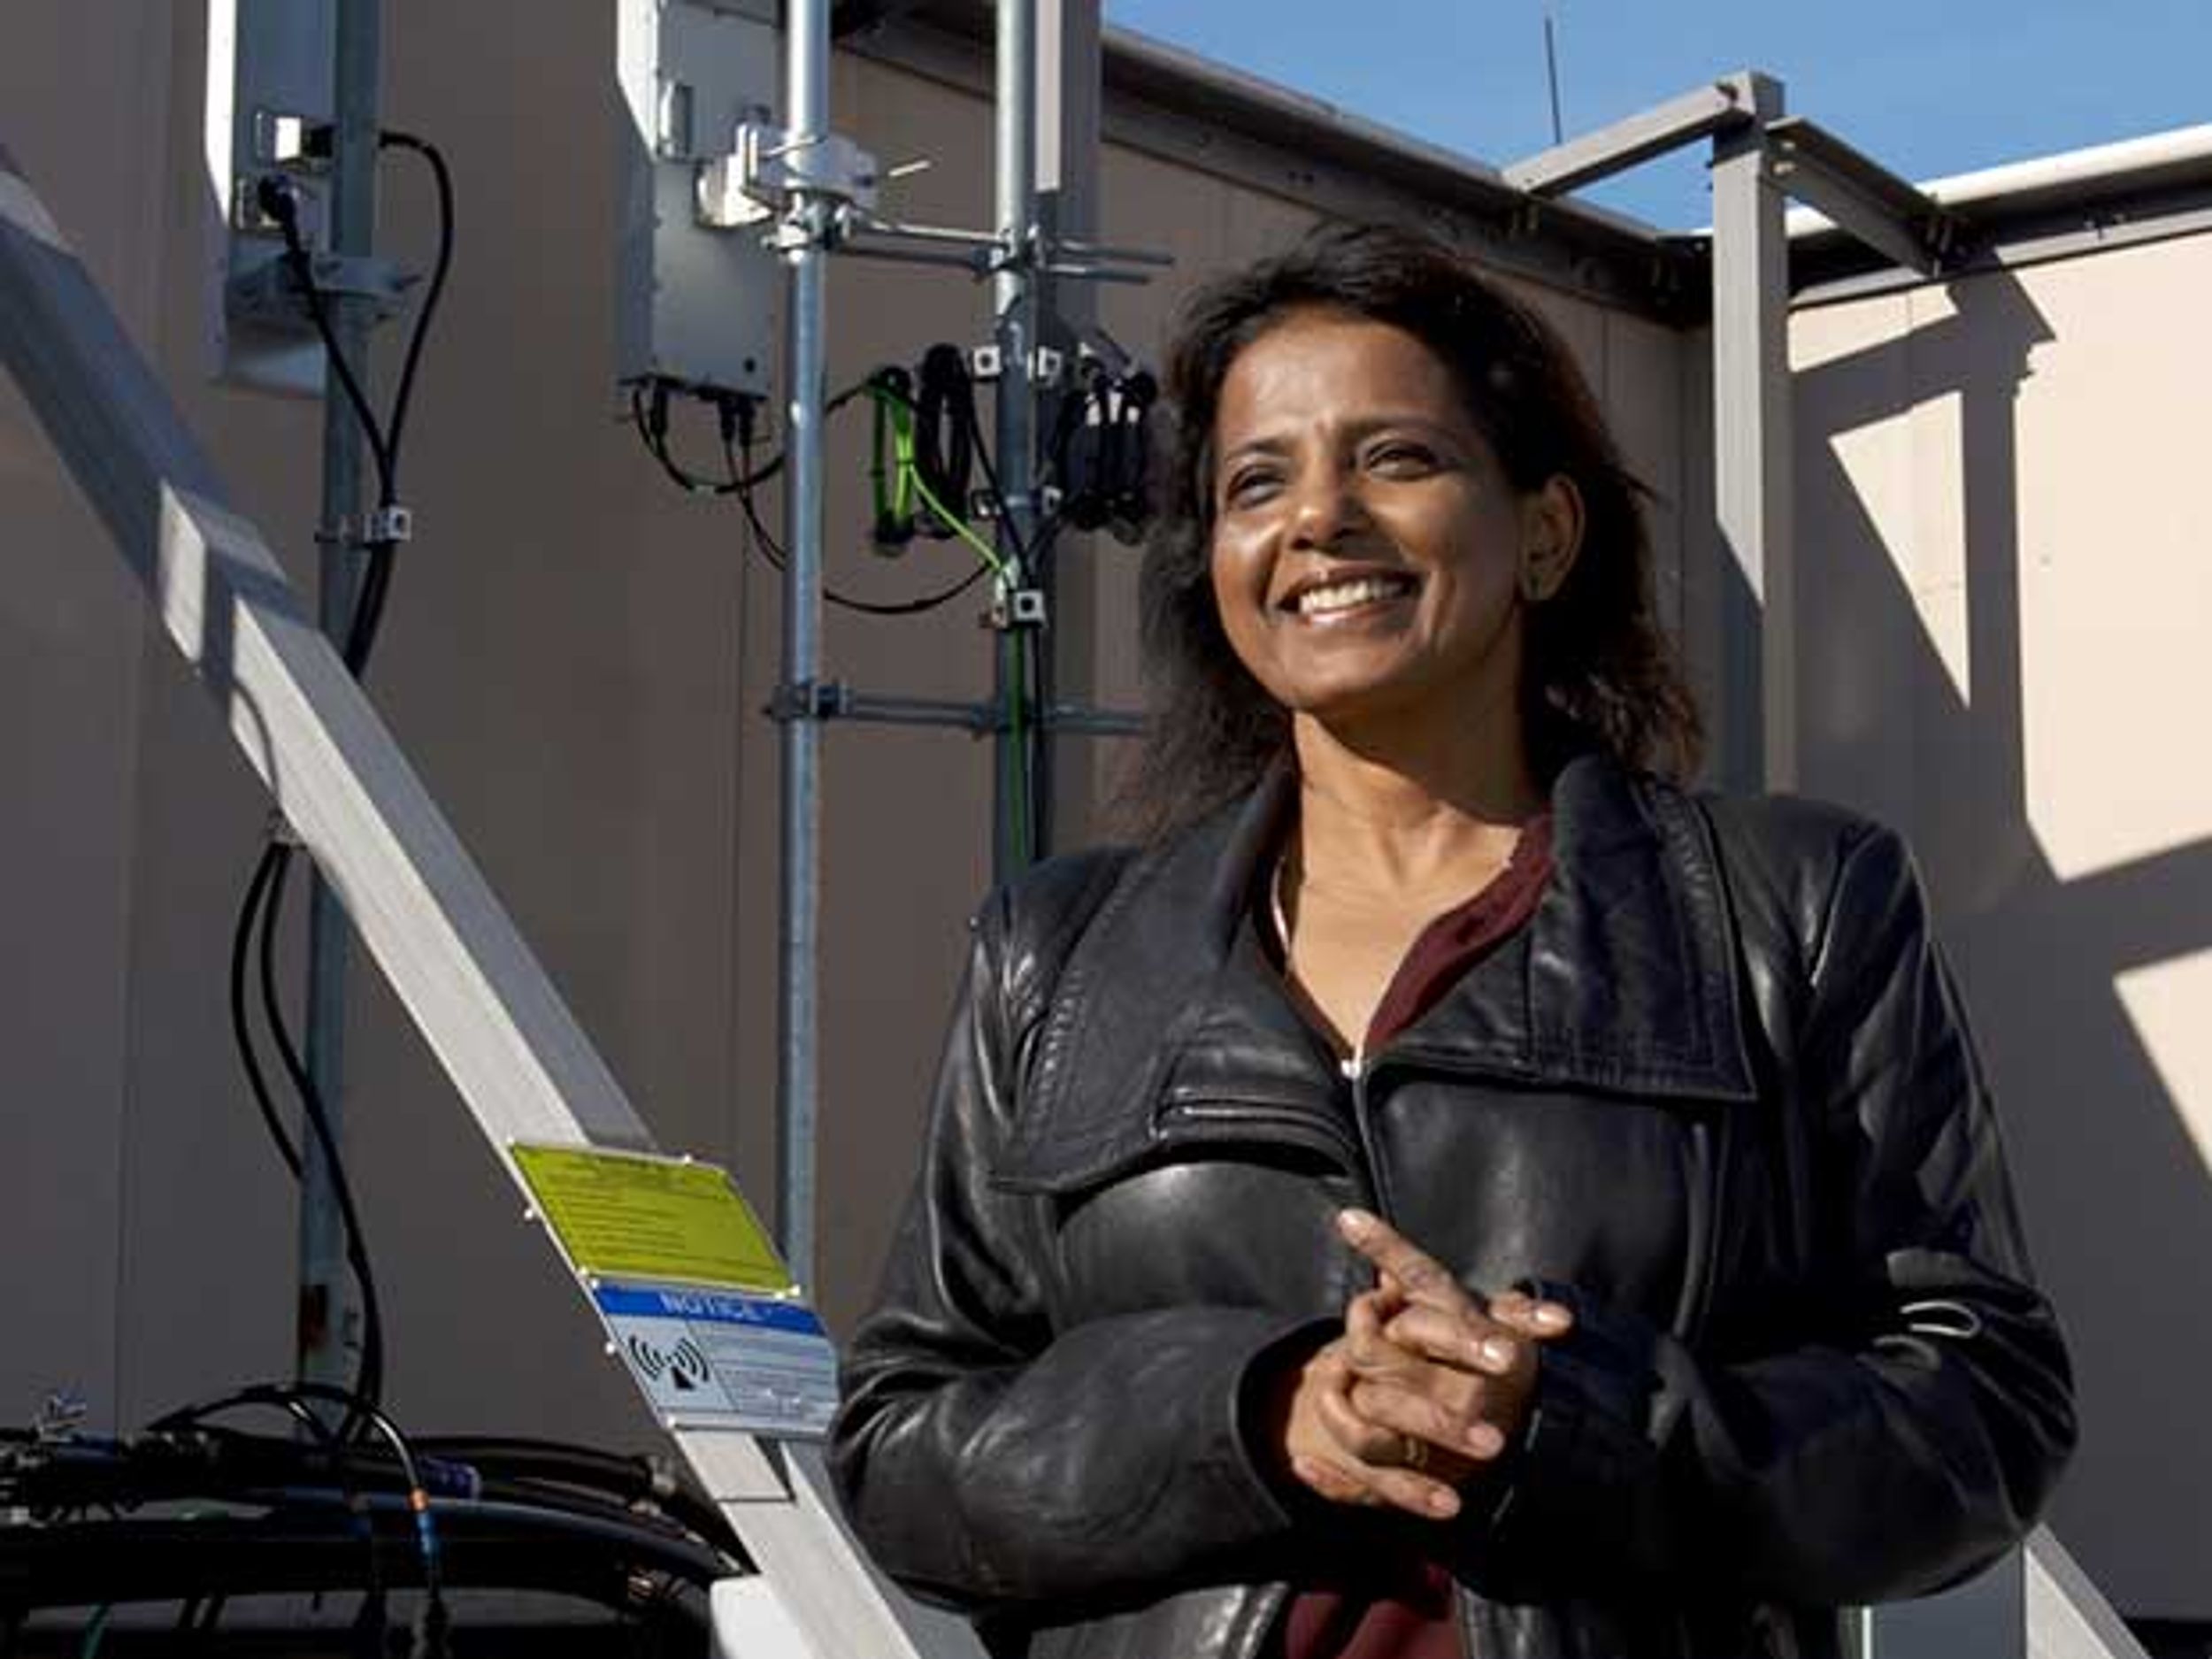 Sanyogita Shamsunder, Verizon's director of network planning, is shown standing outside near equipment used to test new base station technology.